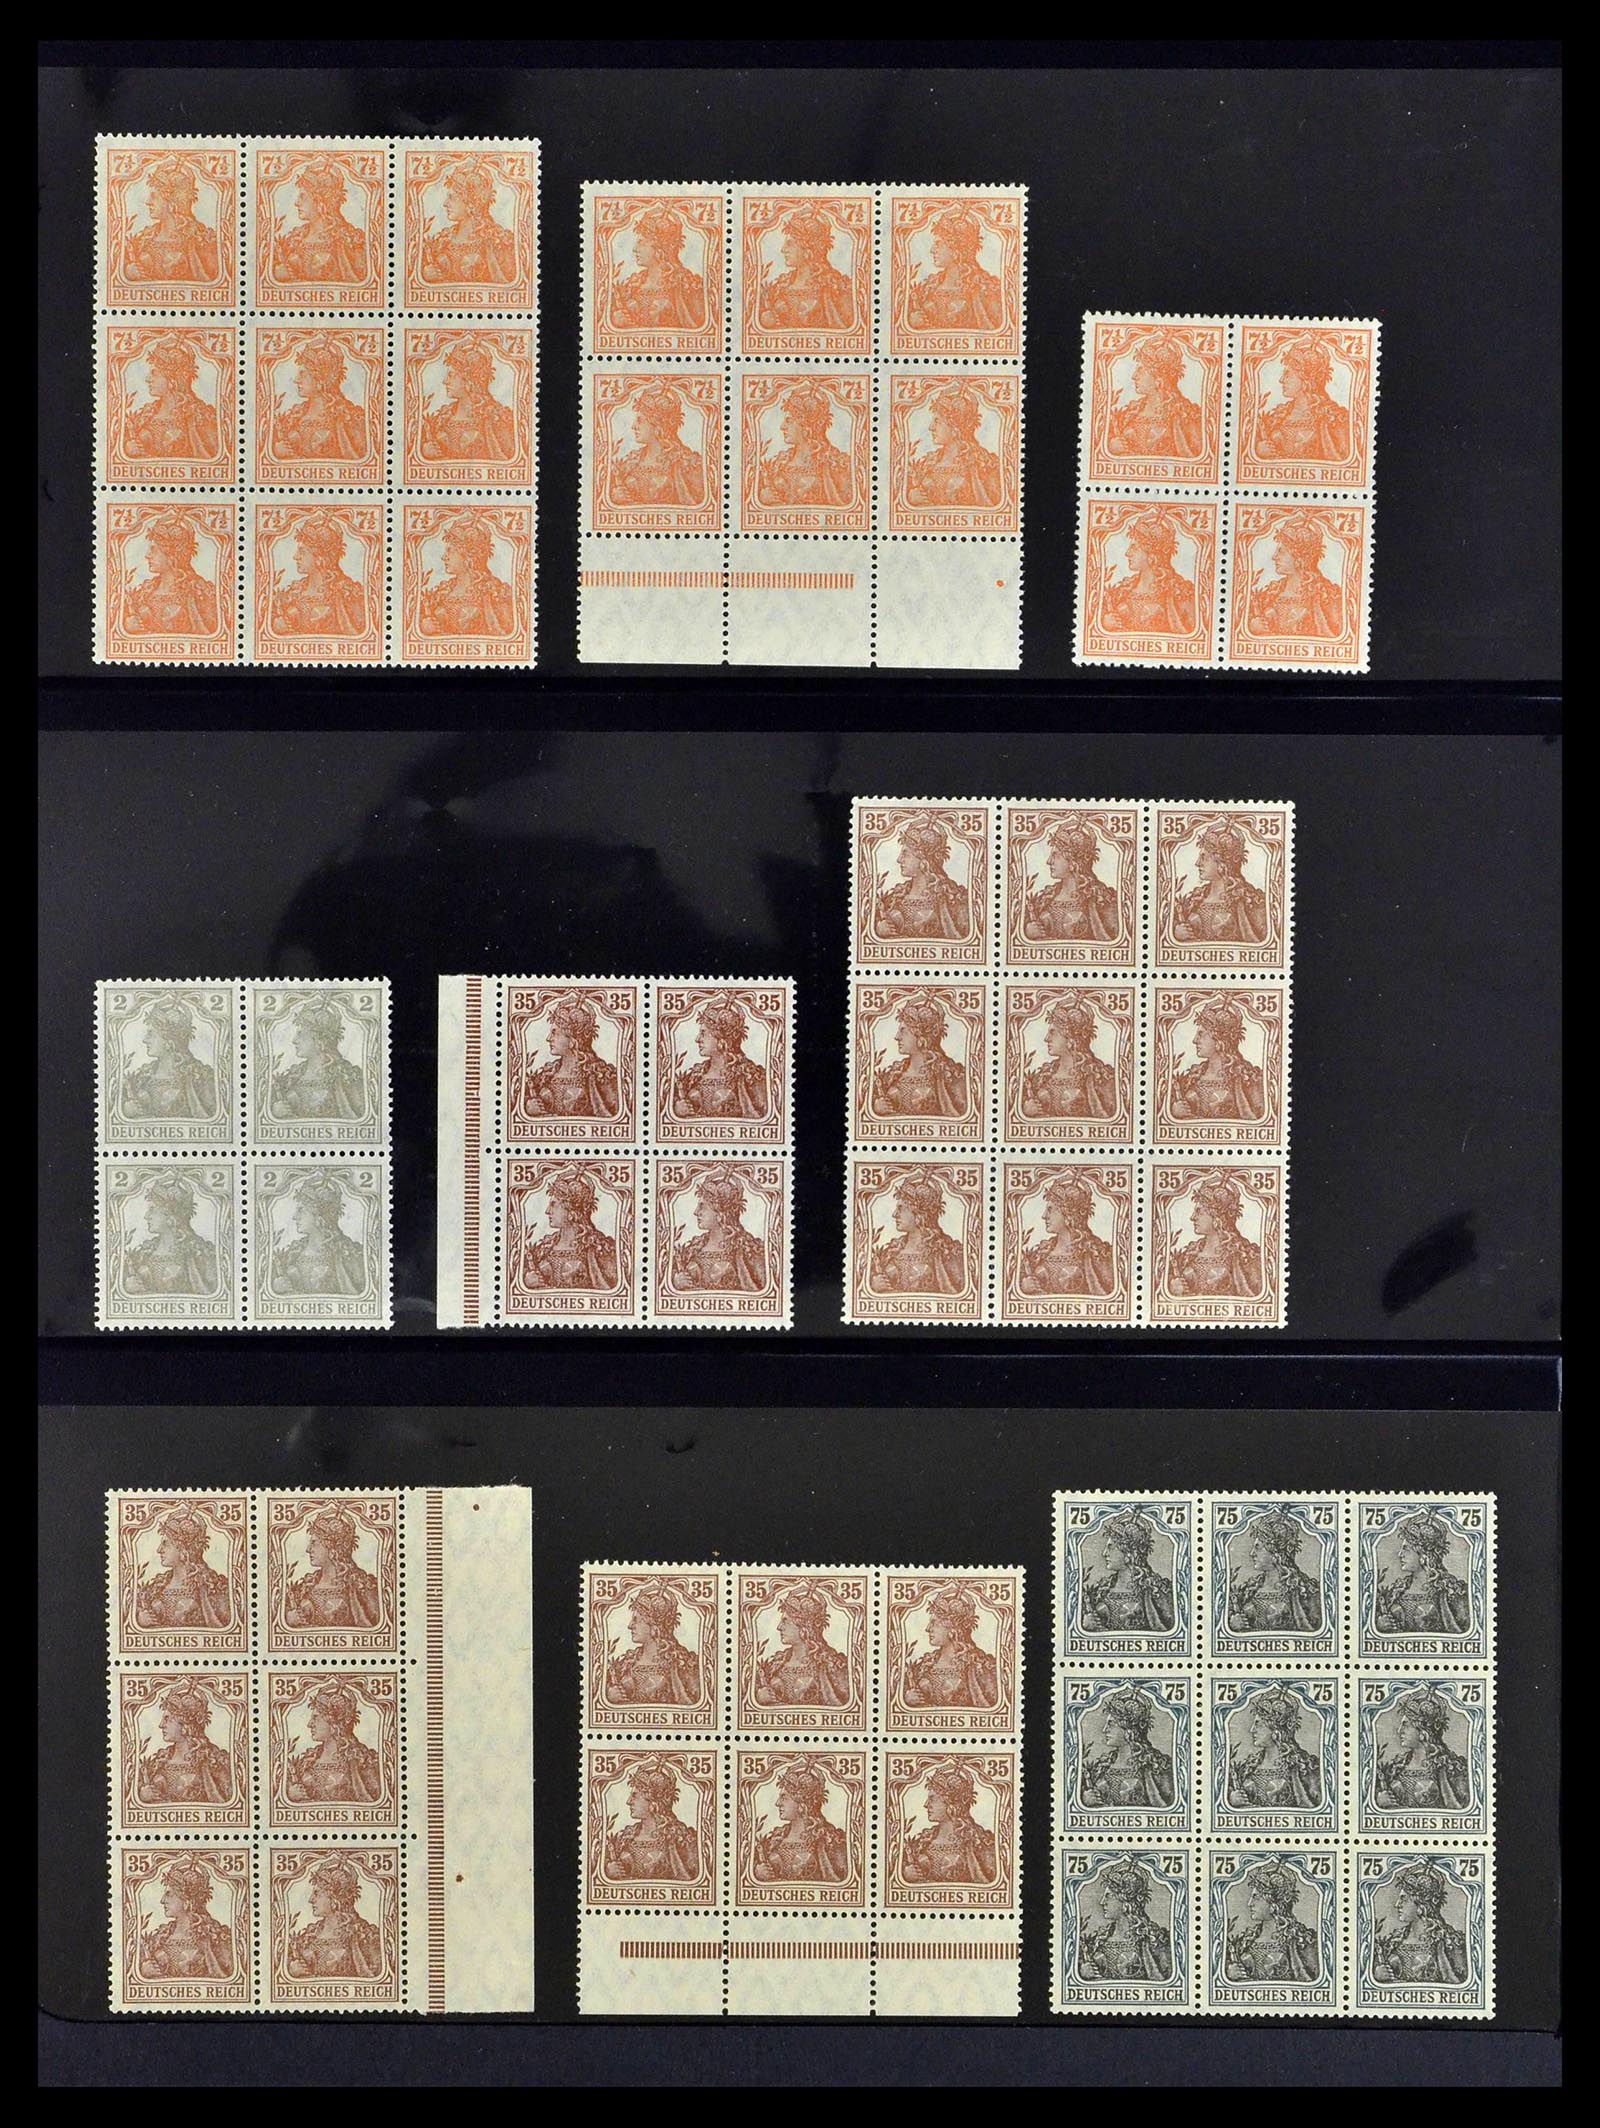 39255 0004 - Stamp collection 39255 German Reich MNH blocks of 4.